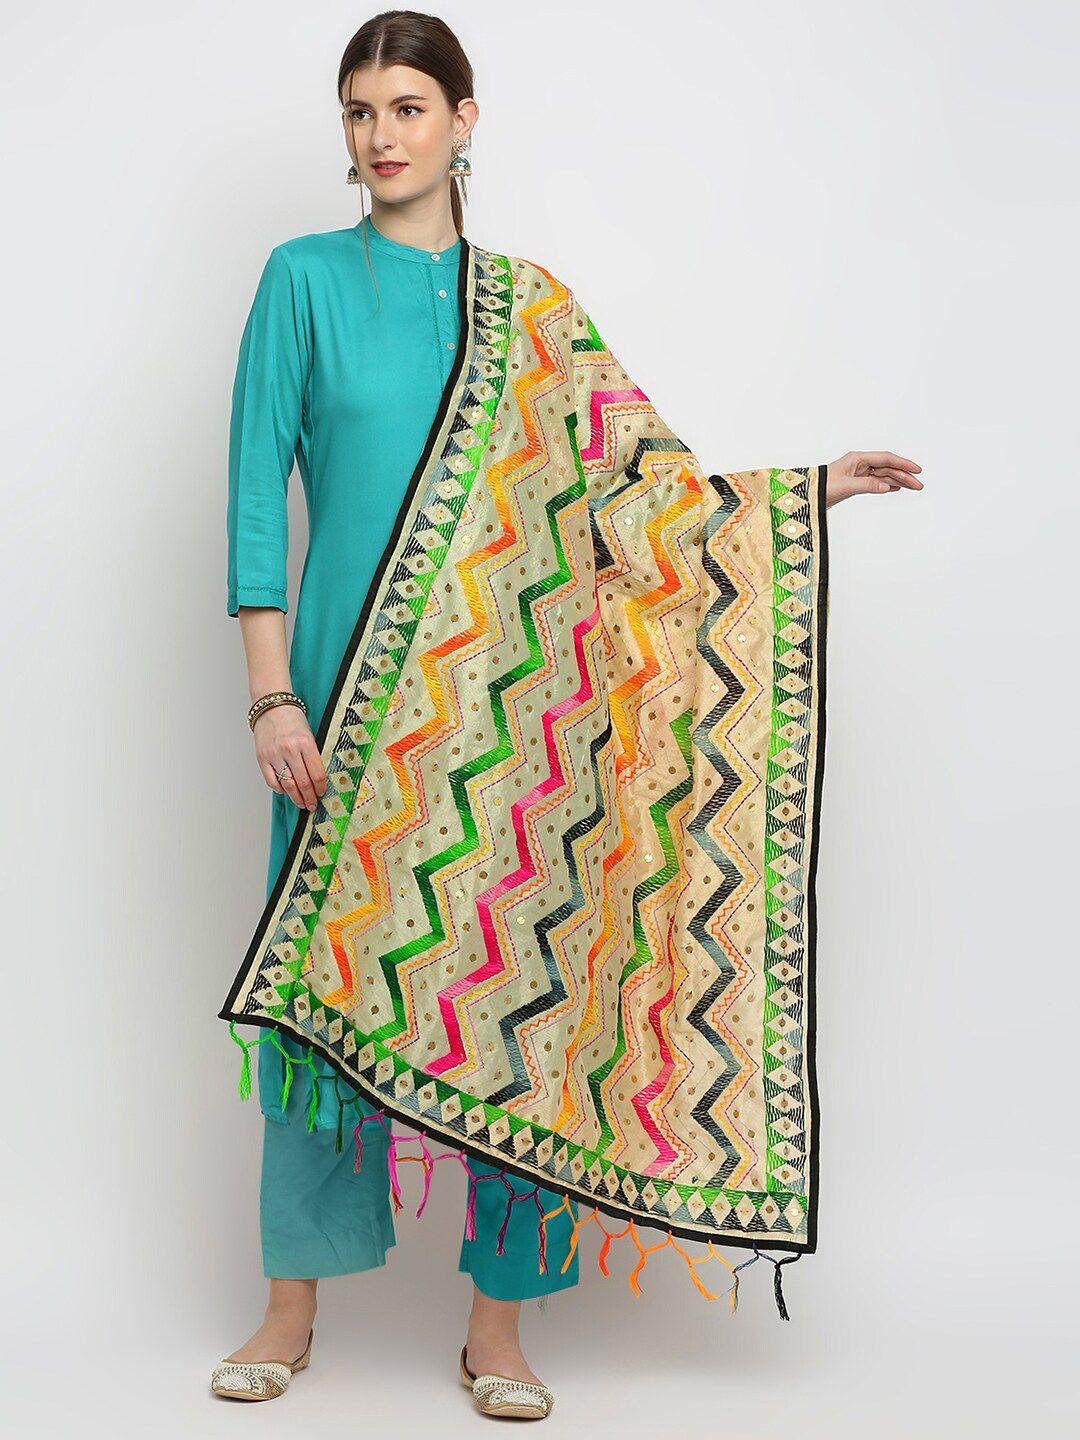 dupatta-bazaar-gold-toned-&-green-ethnic-motifs-embroidered-dupatta-with-beads-and-stones